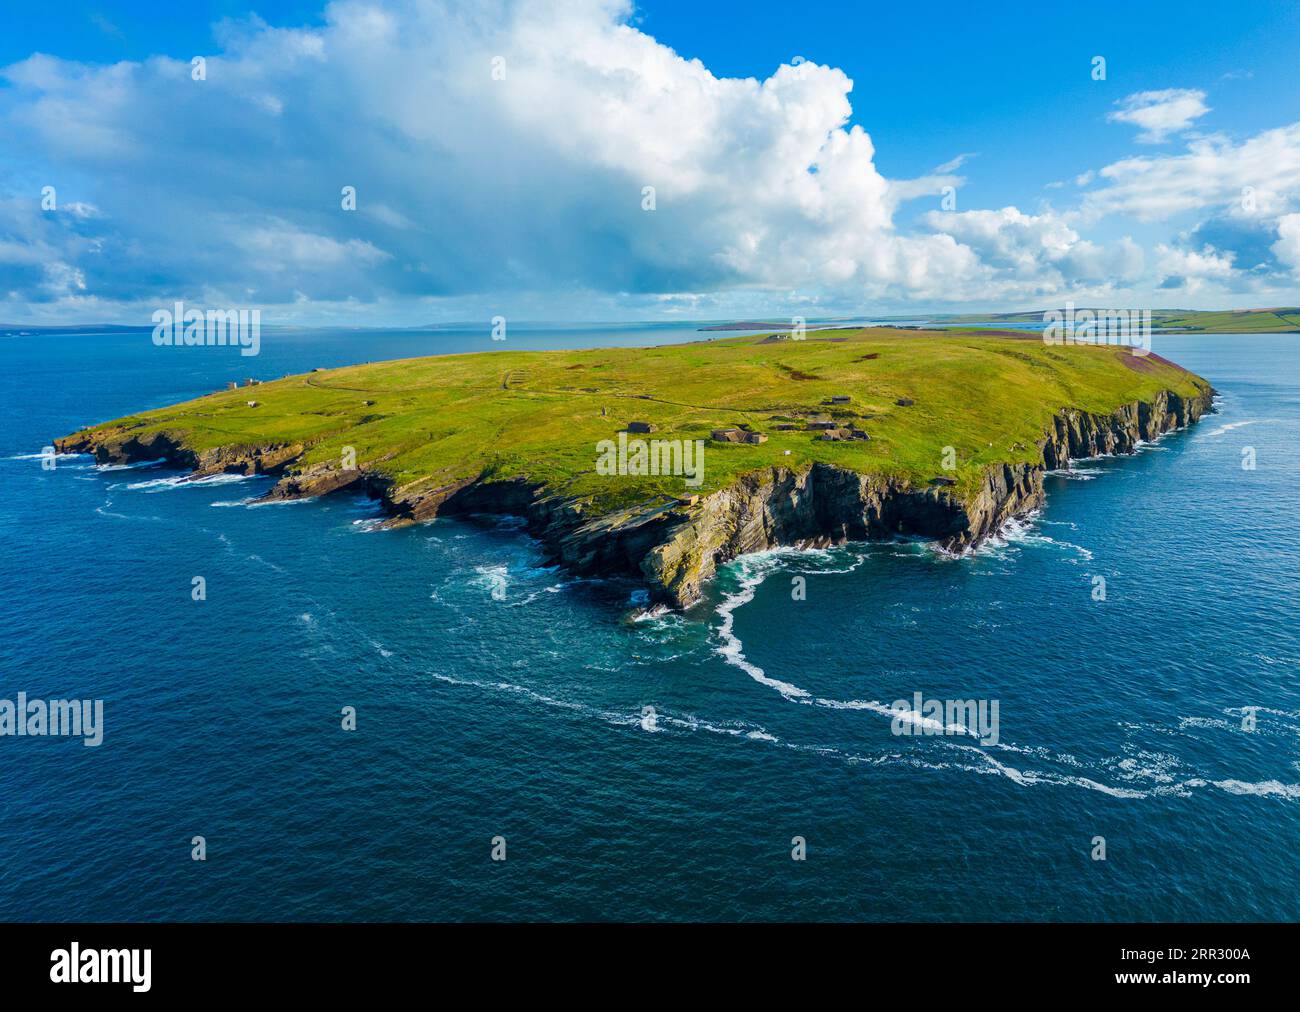 Aerial view of Hoxa Battery coastal defences at Scapa Flow at Hoxa on South Ronaldsay, Orkney Islands, Scotland, UK. Stock Photo